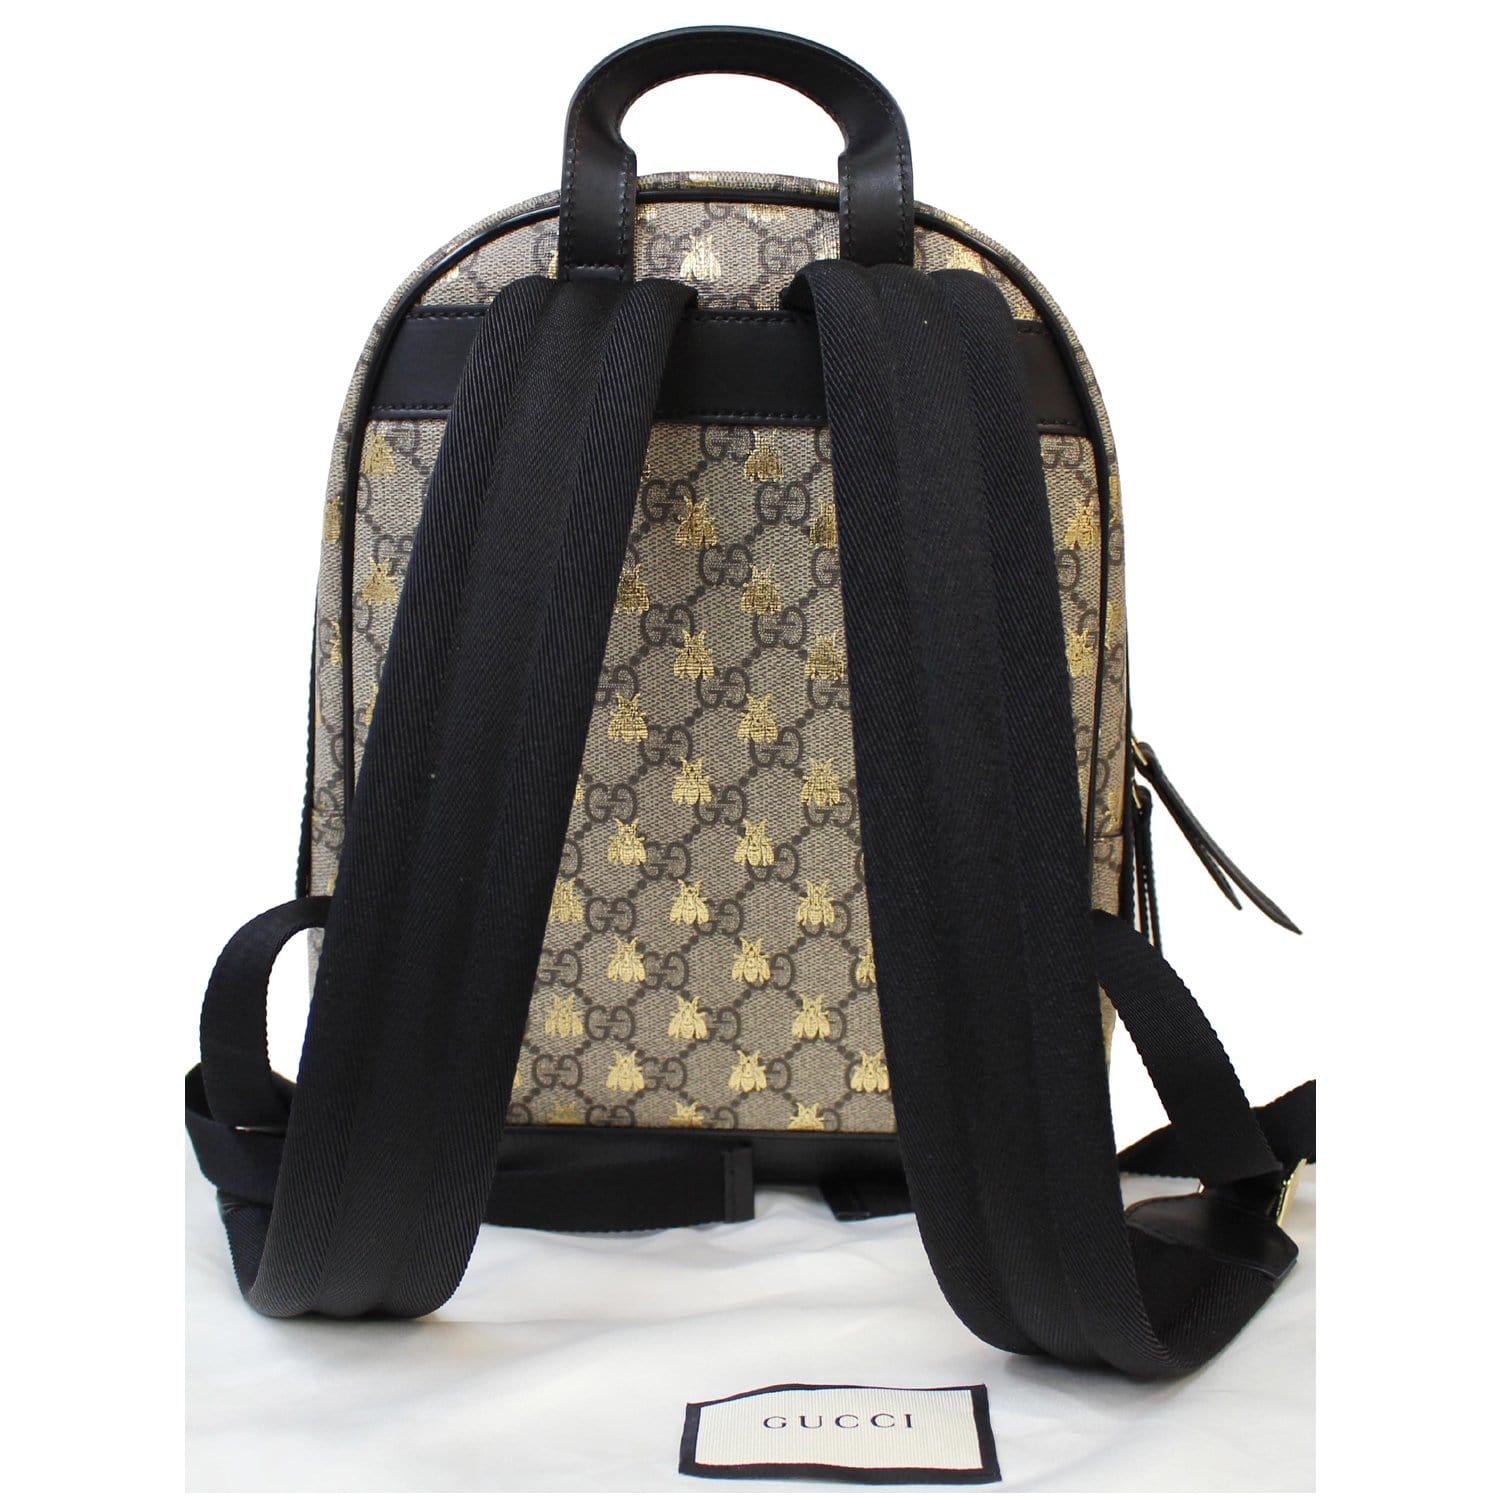 GUCCI Bees Small Day GG Supreme Monogram Backpack Bag Beige 427042